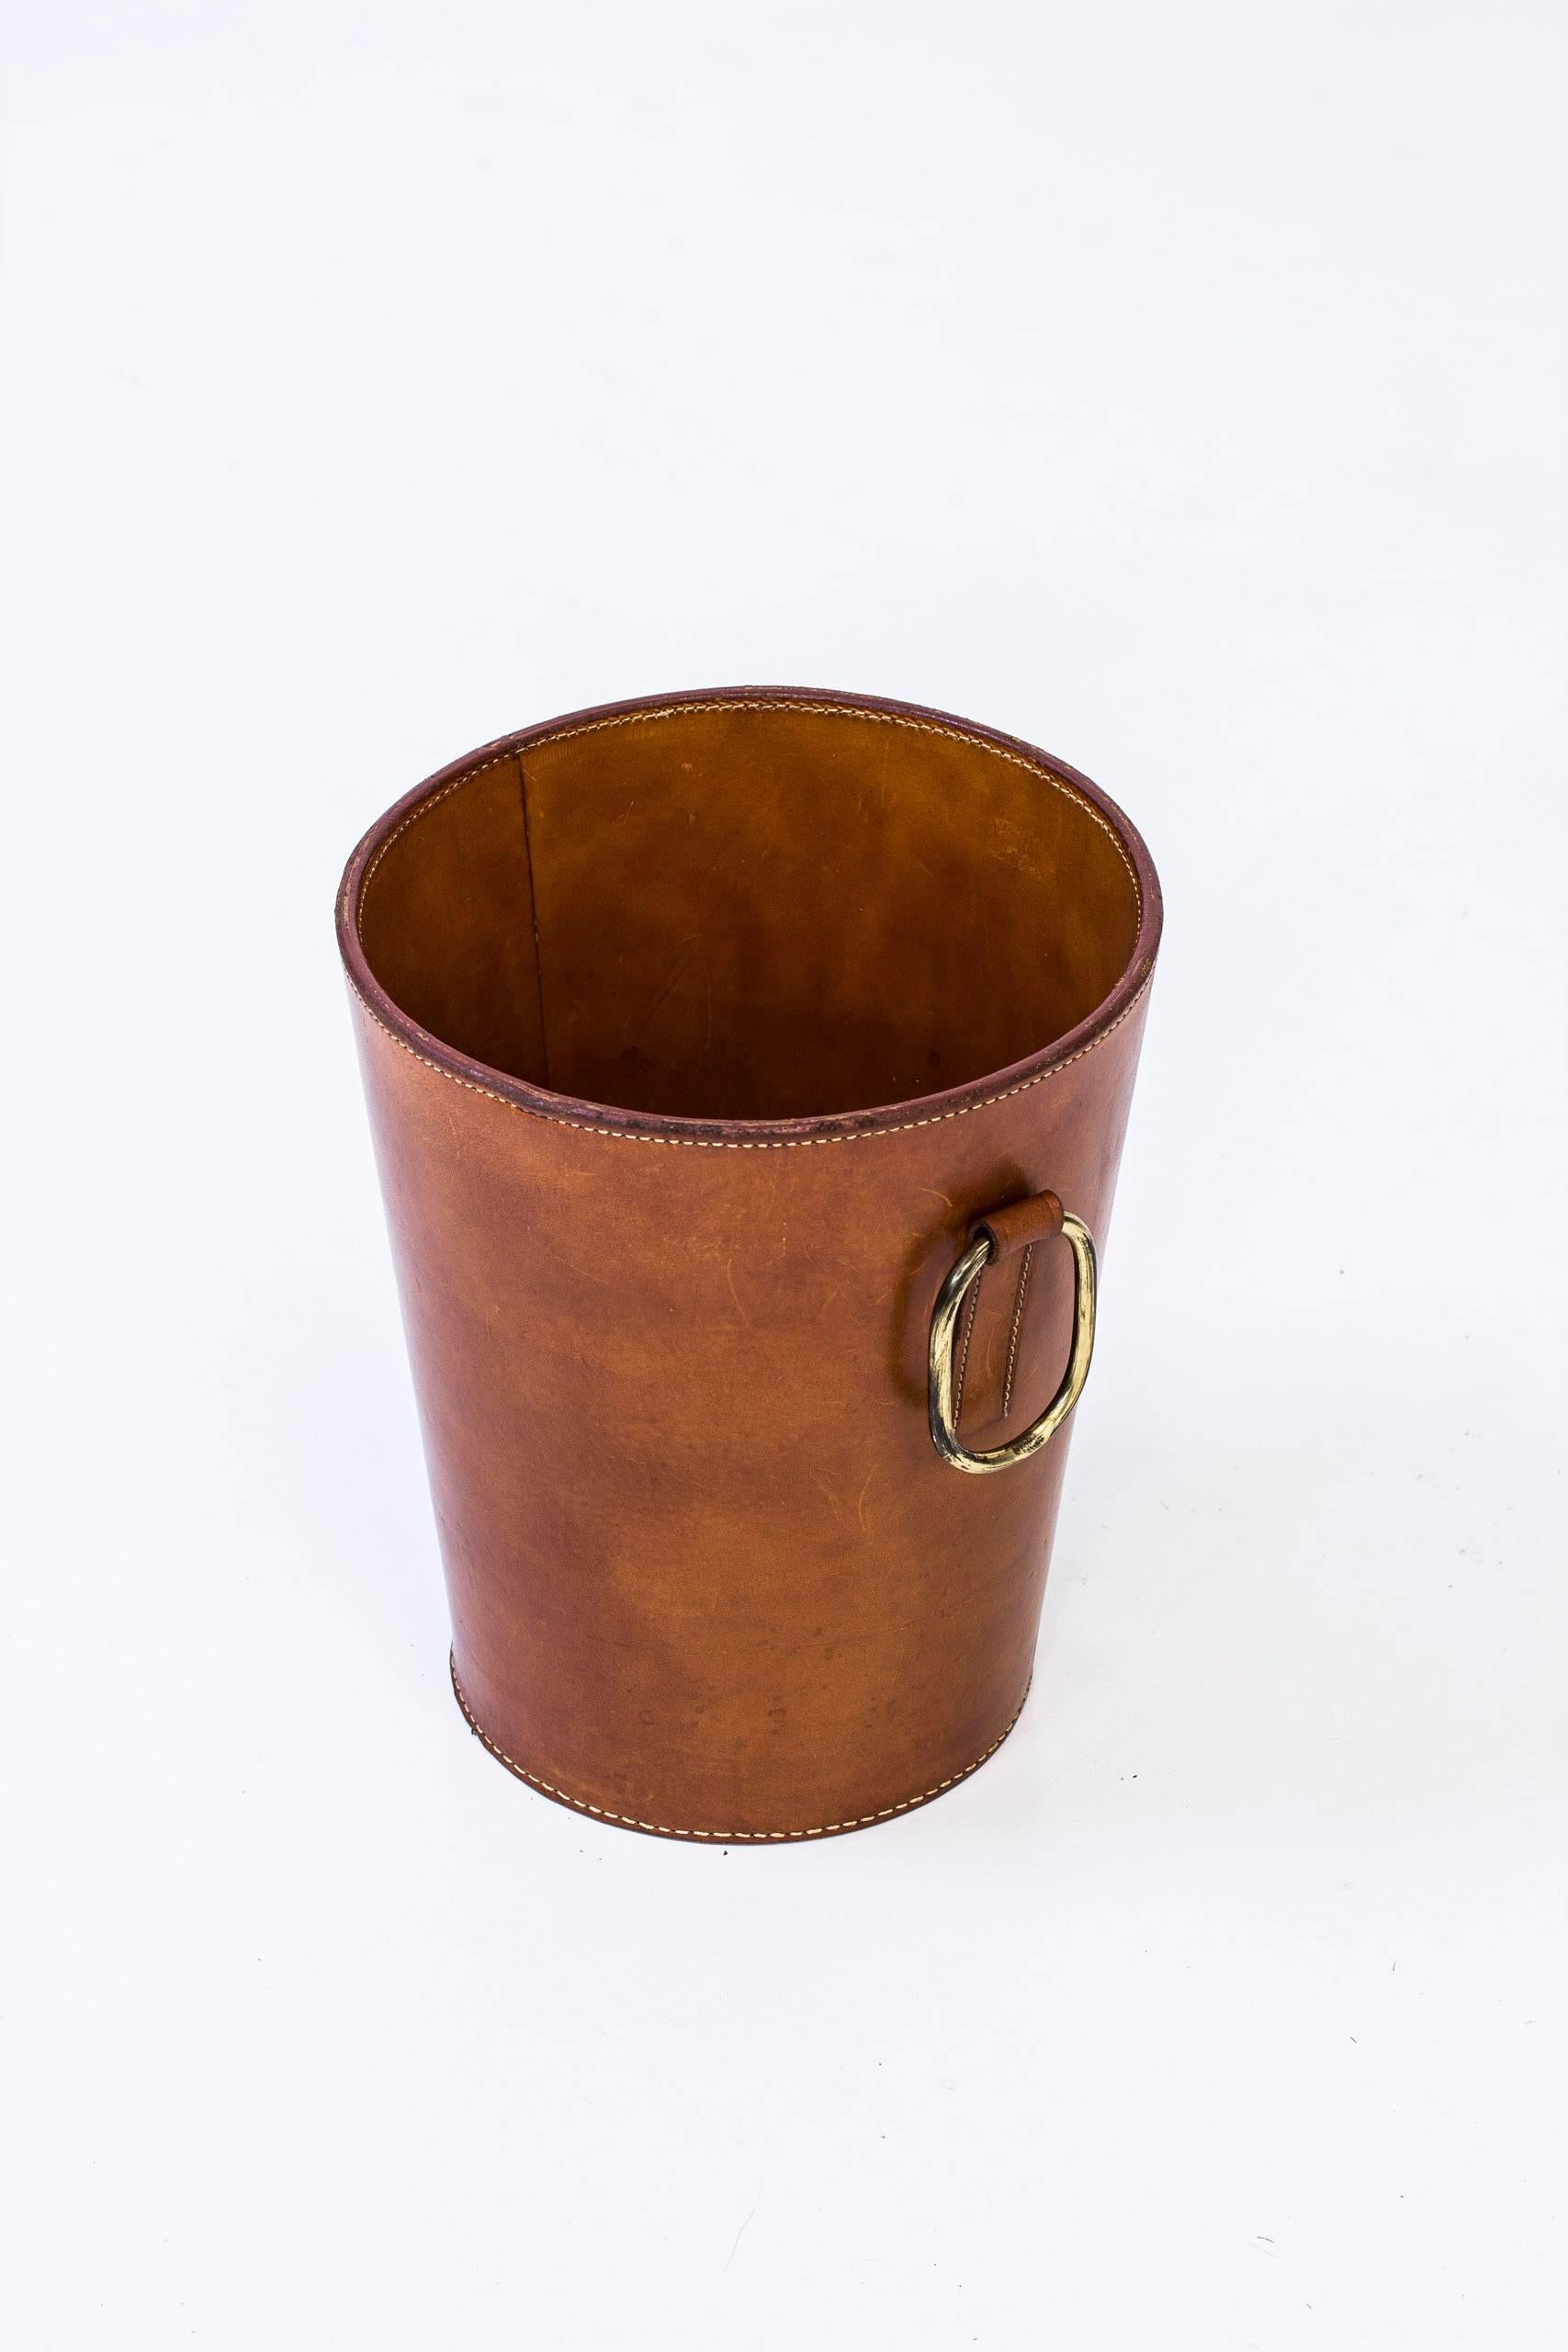 Waste paper basket designed by Carl Auböck. Handmade at his own workshop in Vienna, Austria. Made from two layers of thick natural leather. Hand-sewn together and decorated by a large brass hoop. Leather with perfect patina and all seams intact.